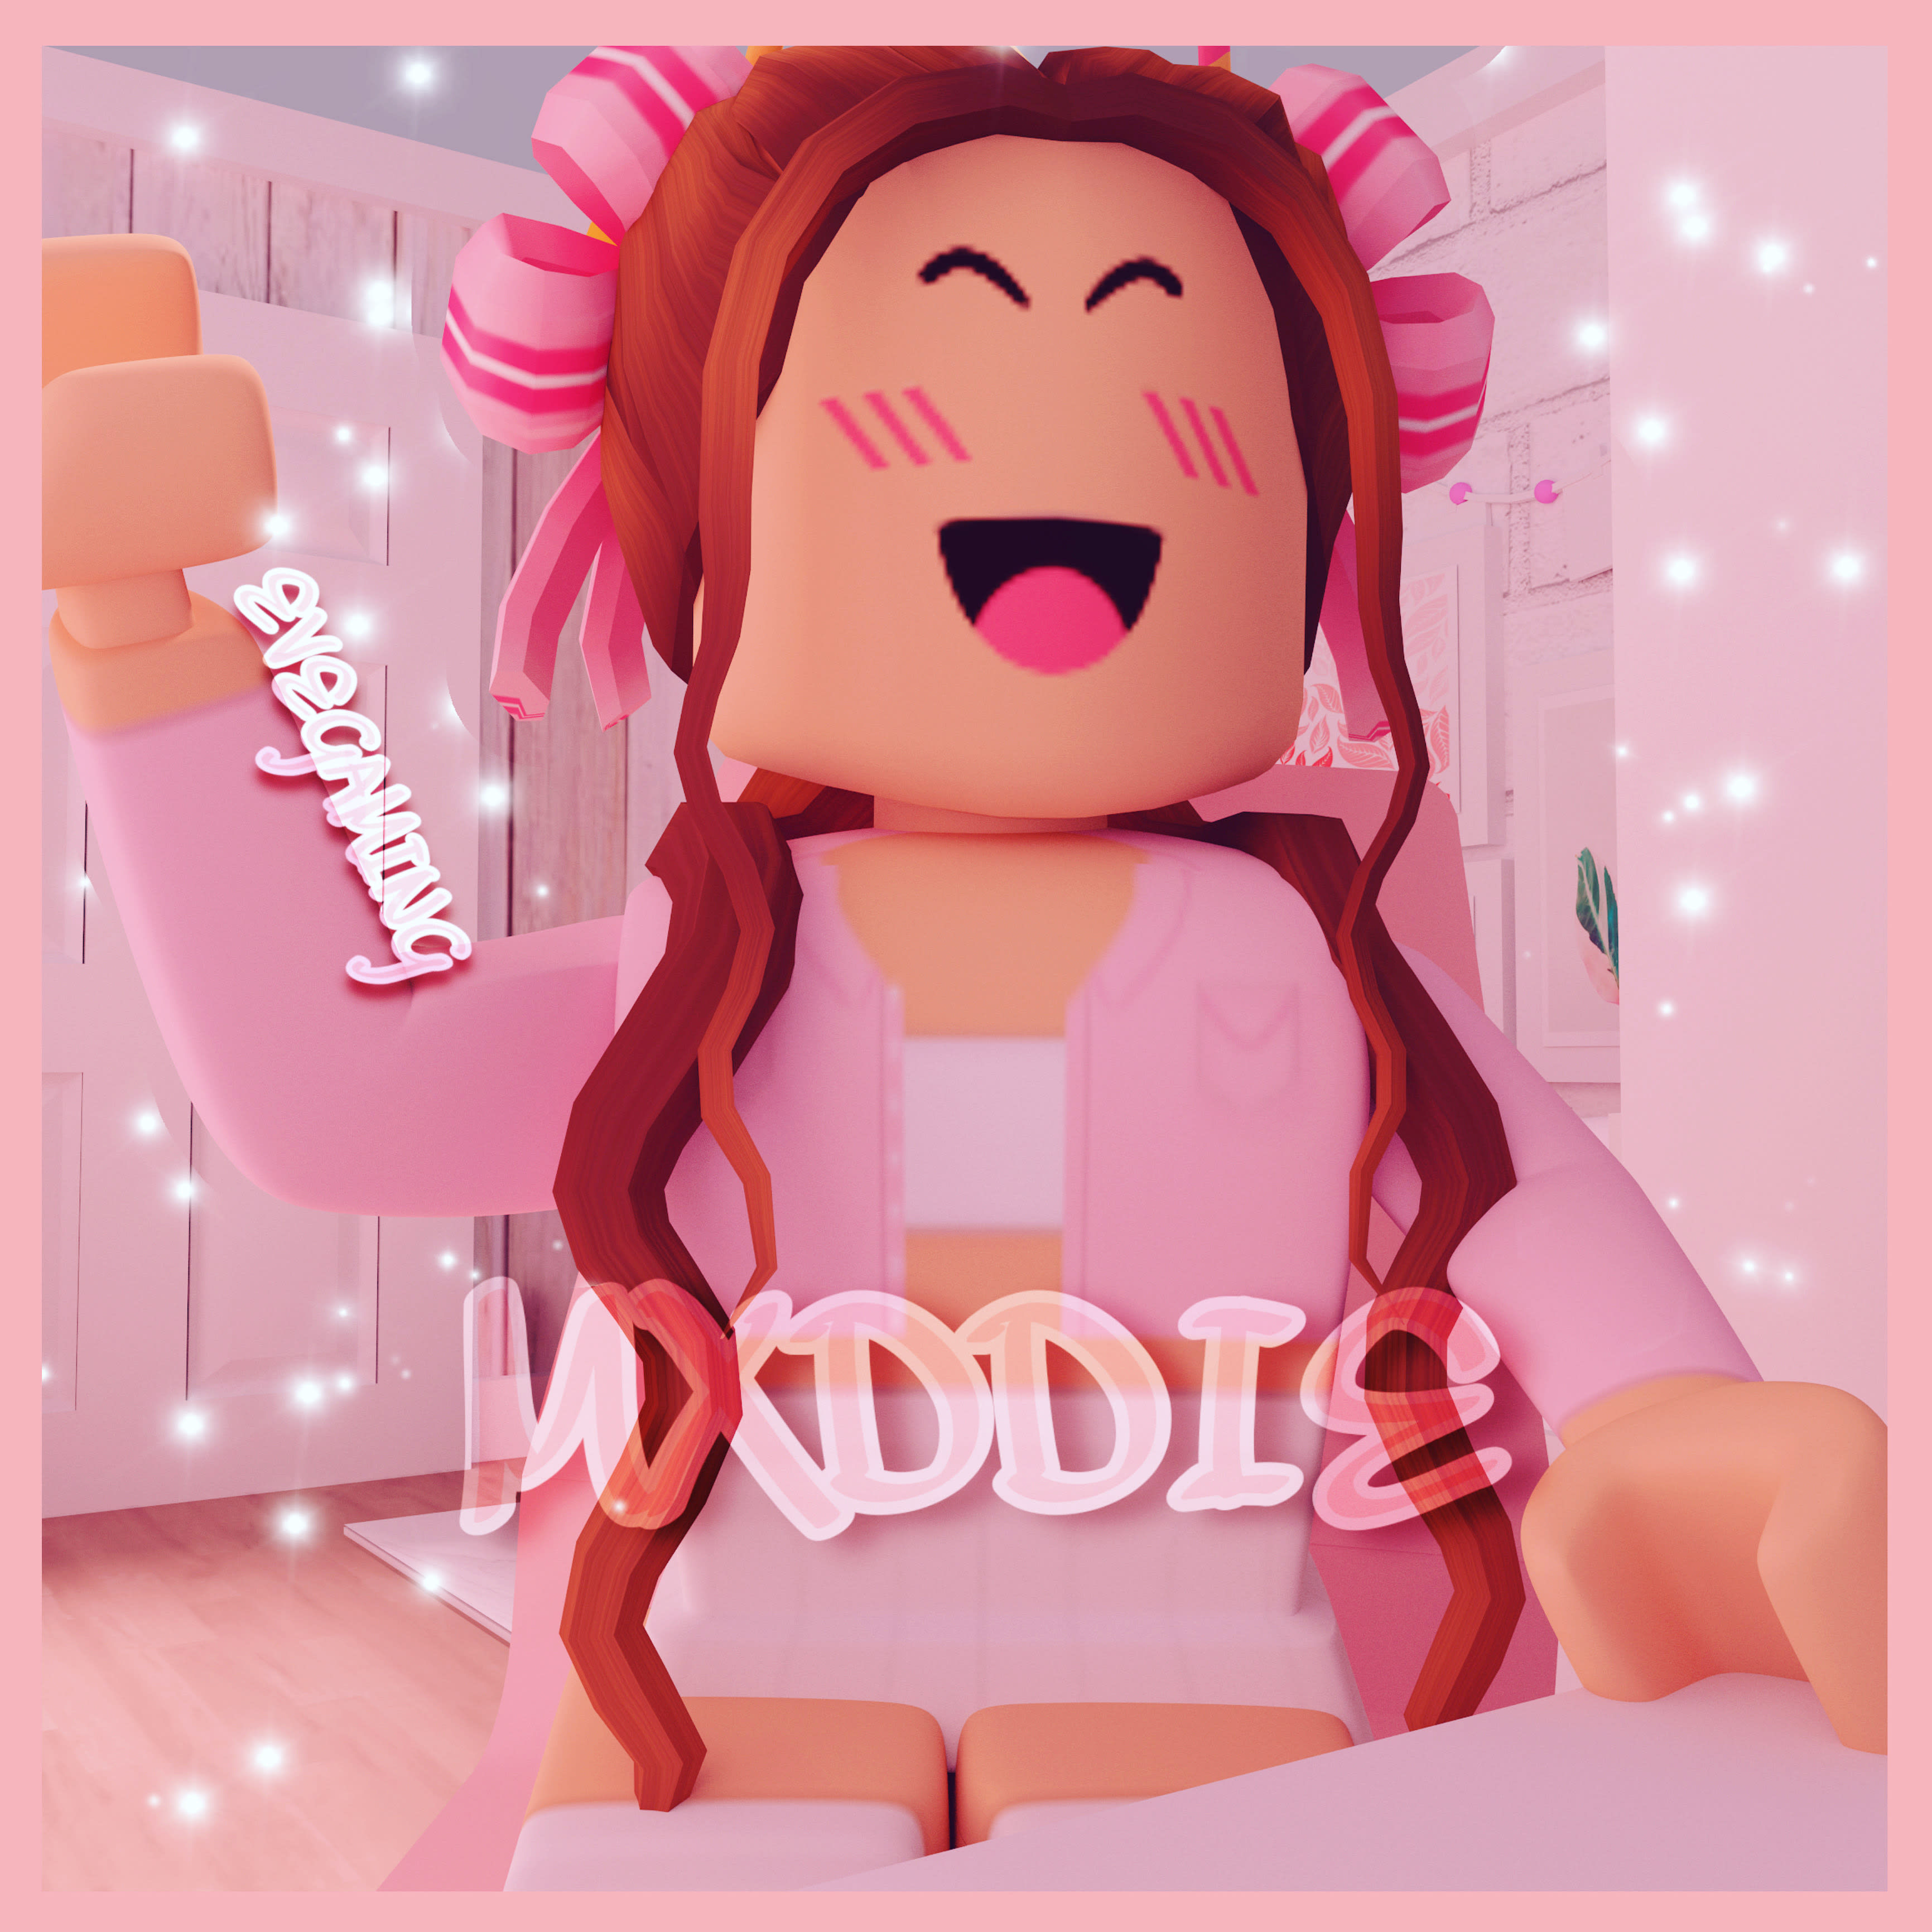 Create Roblox Designs And Gfx By Evegxming - roblox girl render